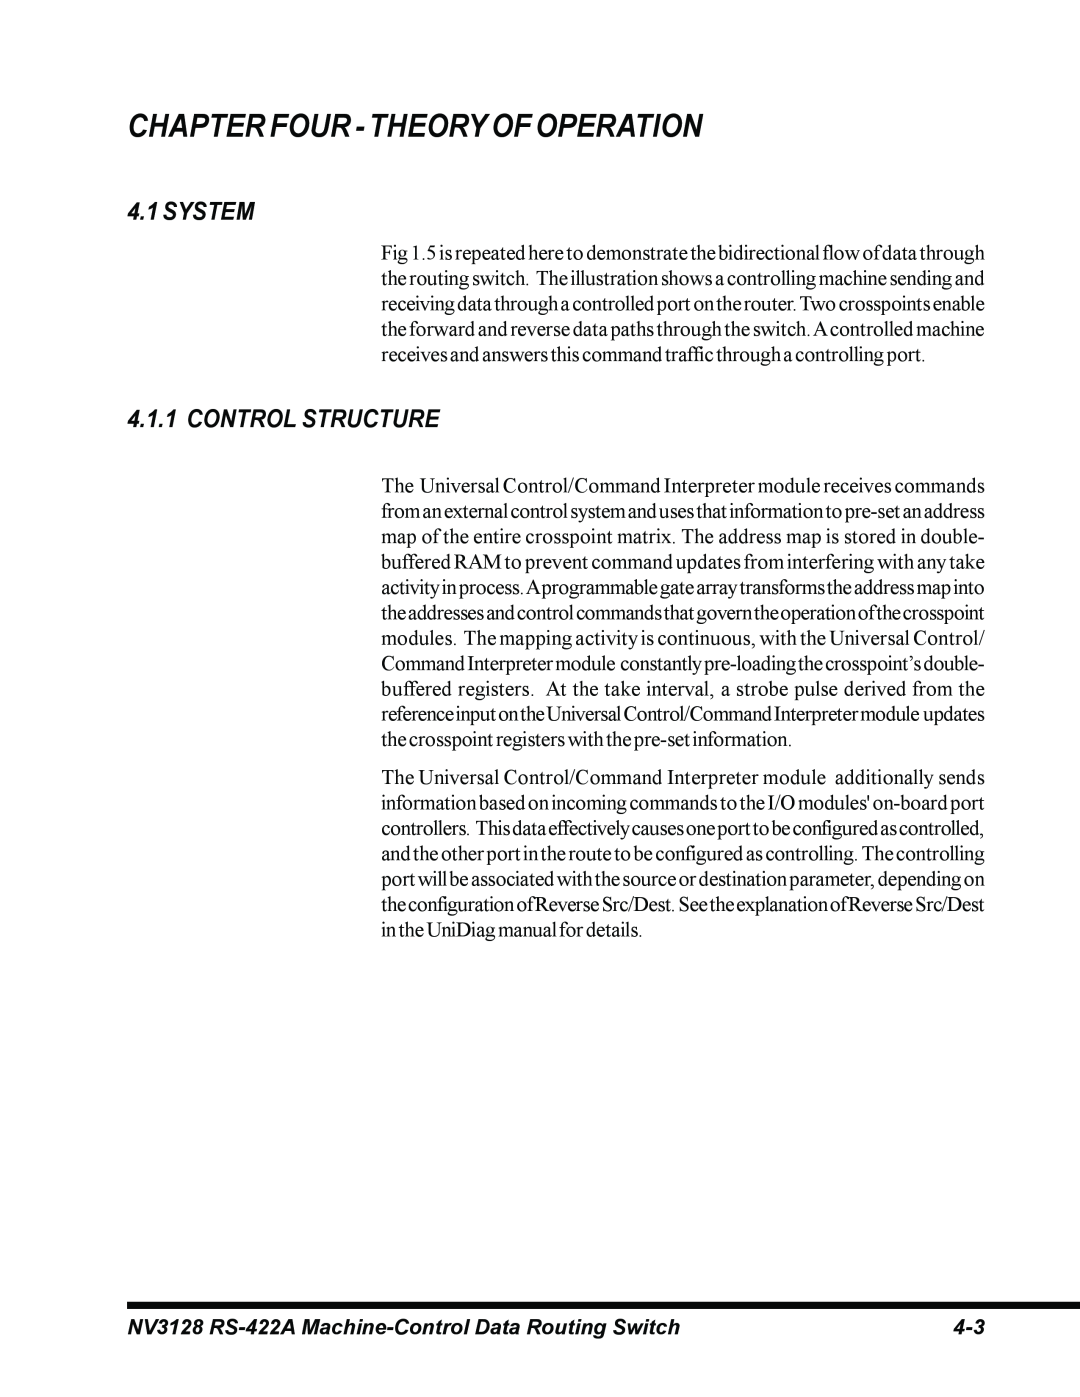 Envision Peripherals NV3128 manual Chapter Four - Theory Of Operation, System, Control Structure 